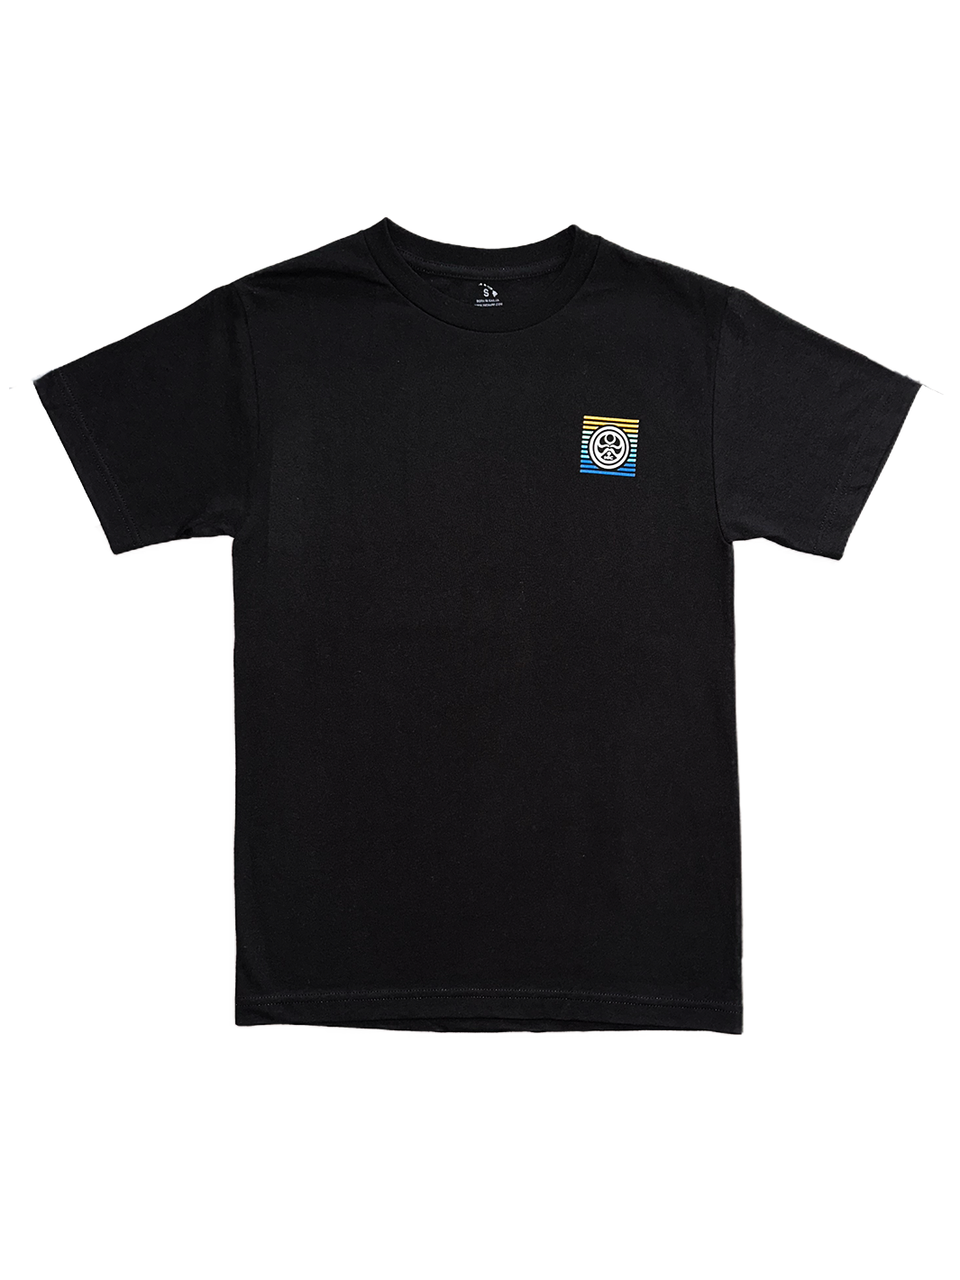 HIC LIFE LINED UP TEE- BLACK